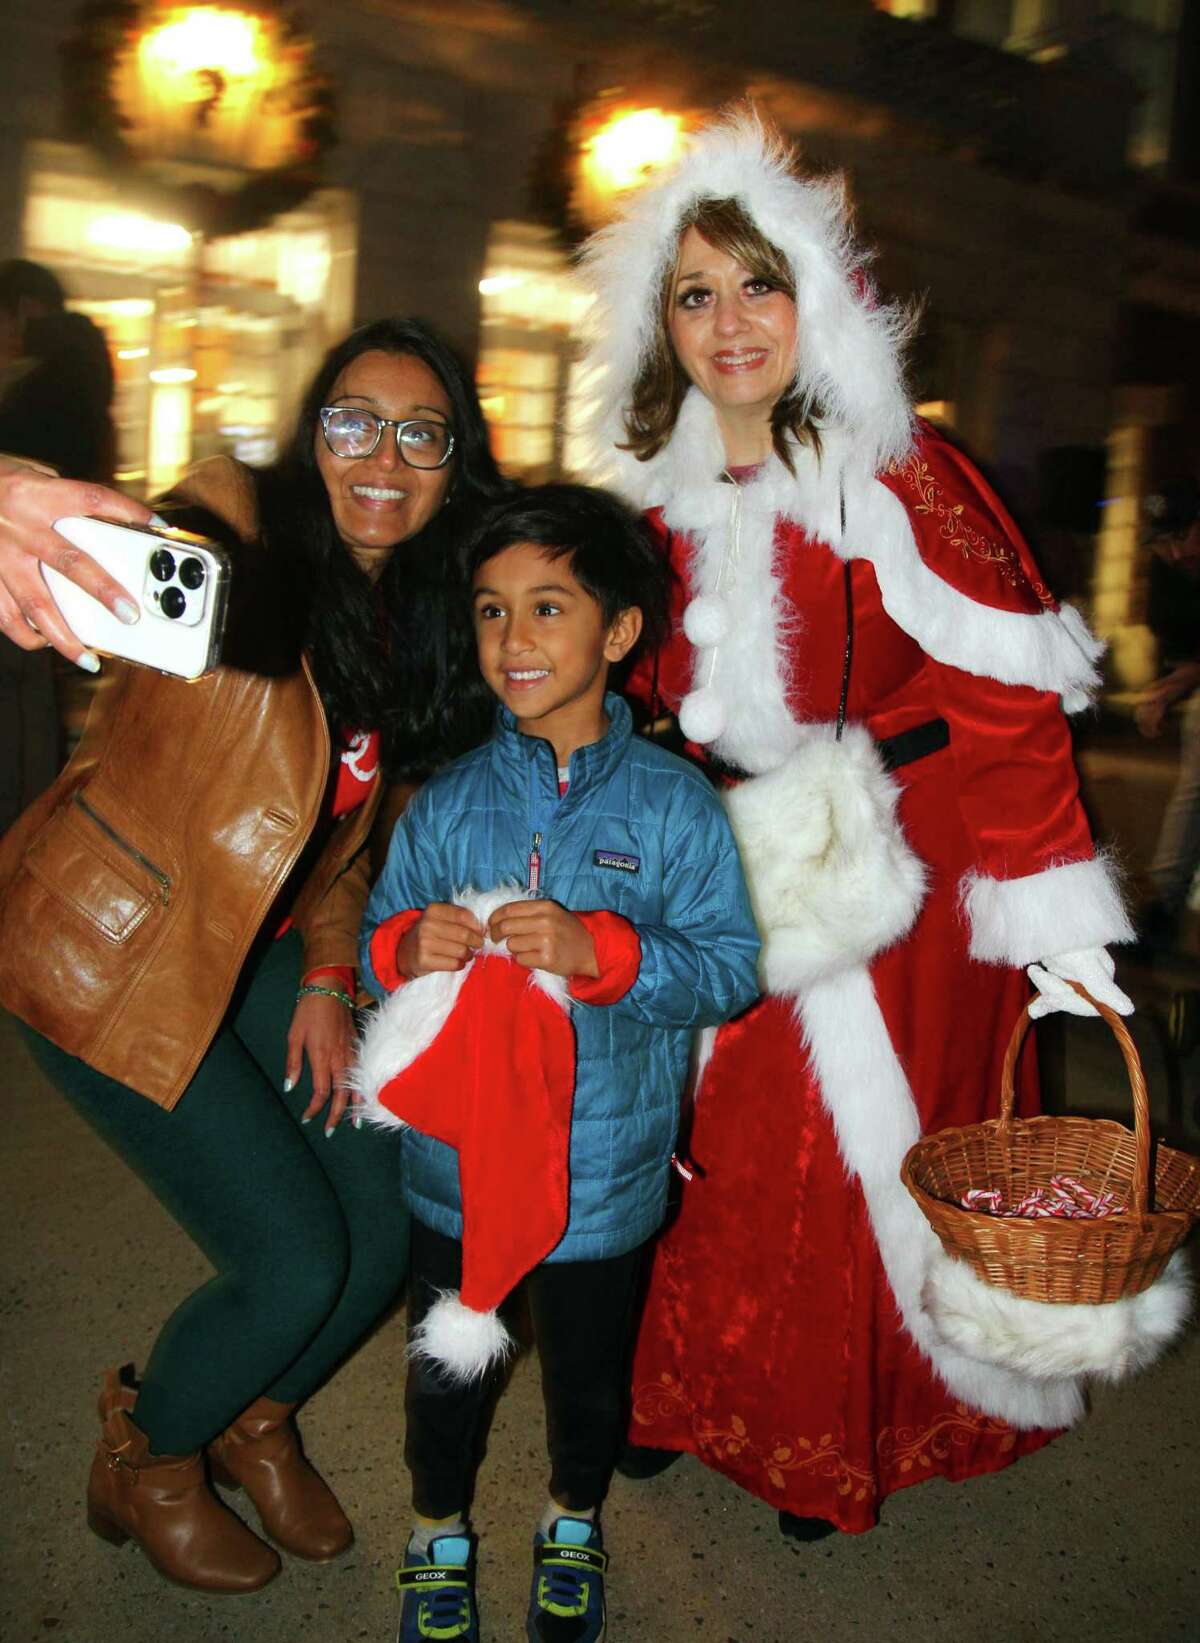 Sowmya Gadey takes a selfie of her son Aiden, 6, with Mrs. Claus during Greenwich's annual tree lighting in front of Town Hall in Greenwich, Conn., on Friday December 2, 2022. Entertainment was provided by Greenwich a cappella and Allegra Dance Greenwich. Families came out to enjoy Christmas music, live choirs and kids got a chance to meet Santa, Mrs. Claus as well as Frosty the Snowman and Rudolph the Red-Nosed Reindeer.